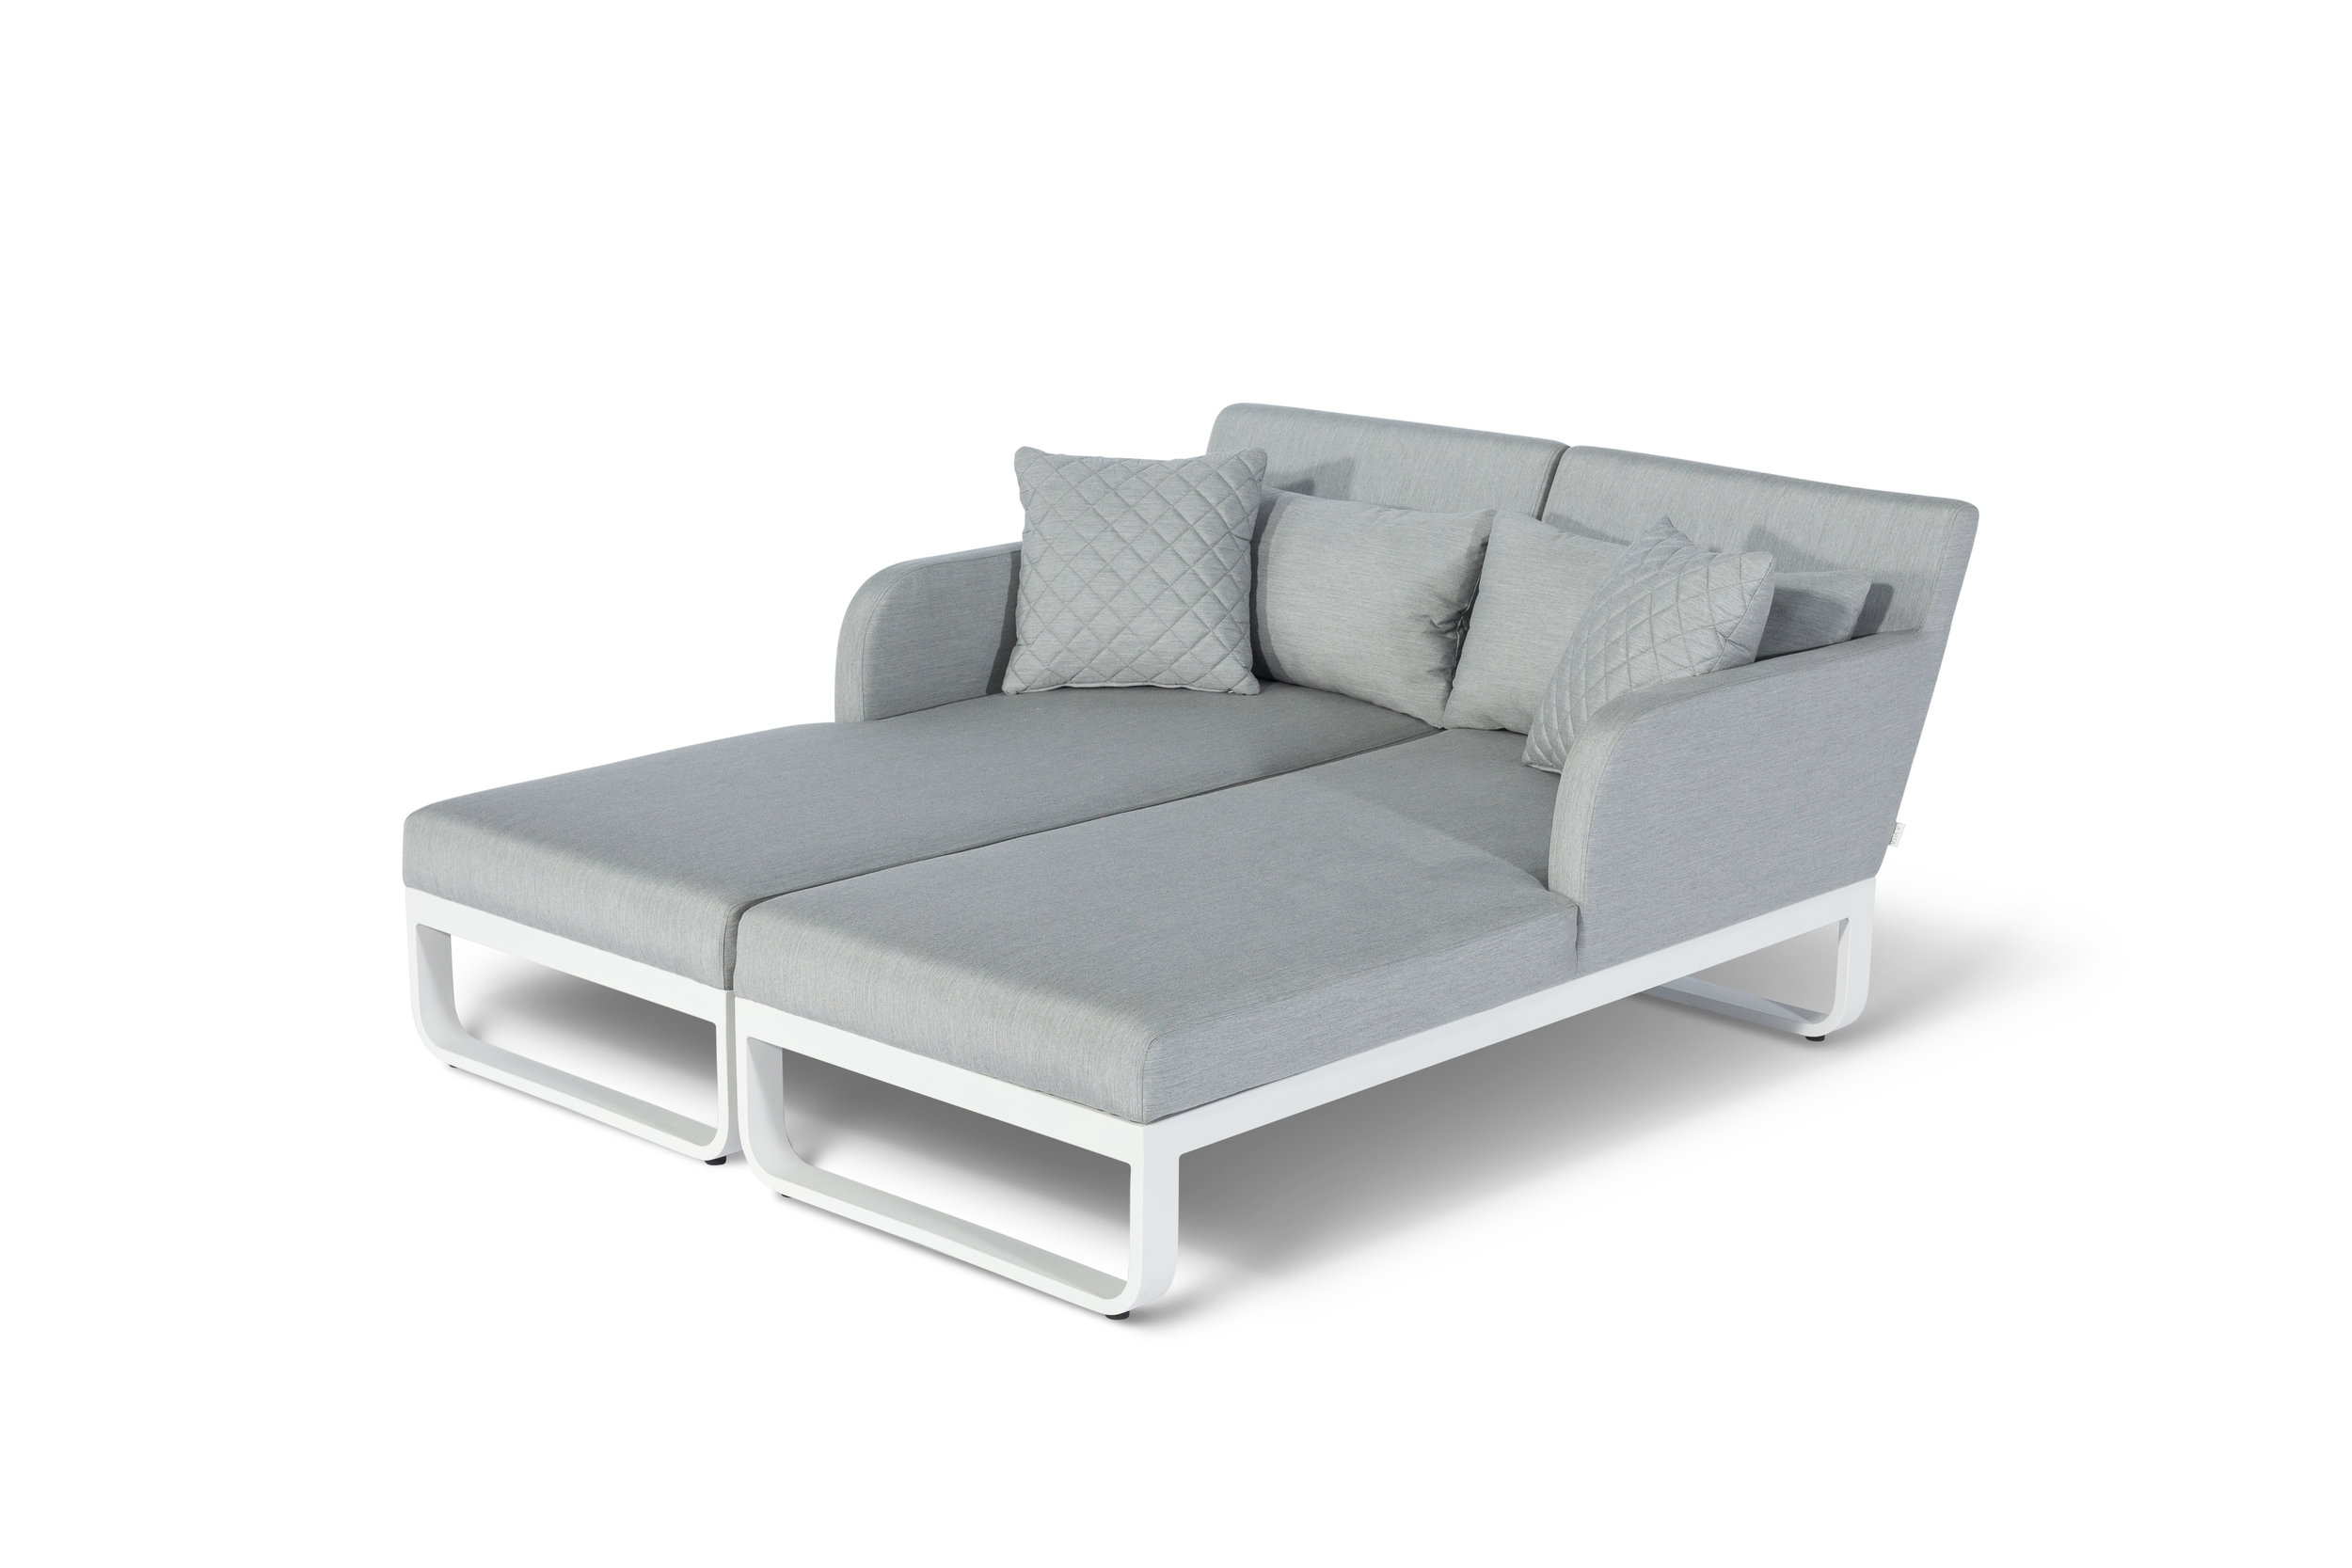 Unity Sunlounger (Without Side Table)